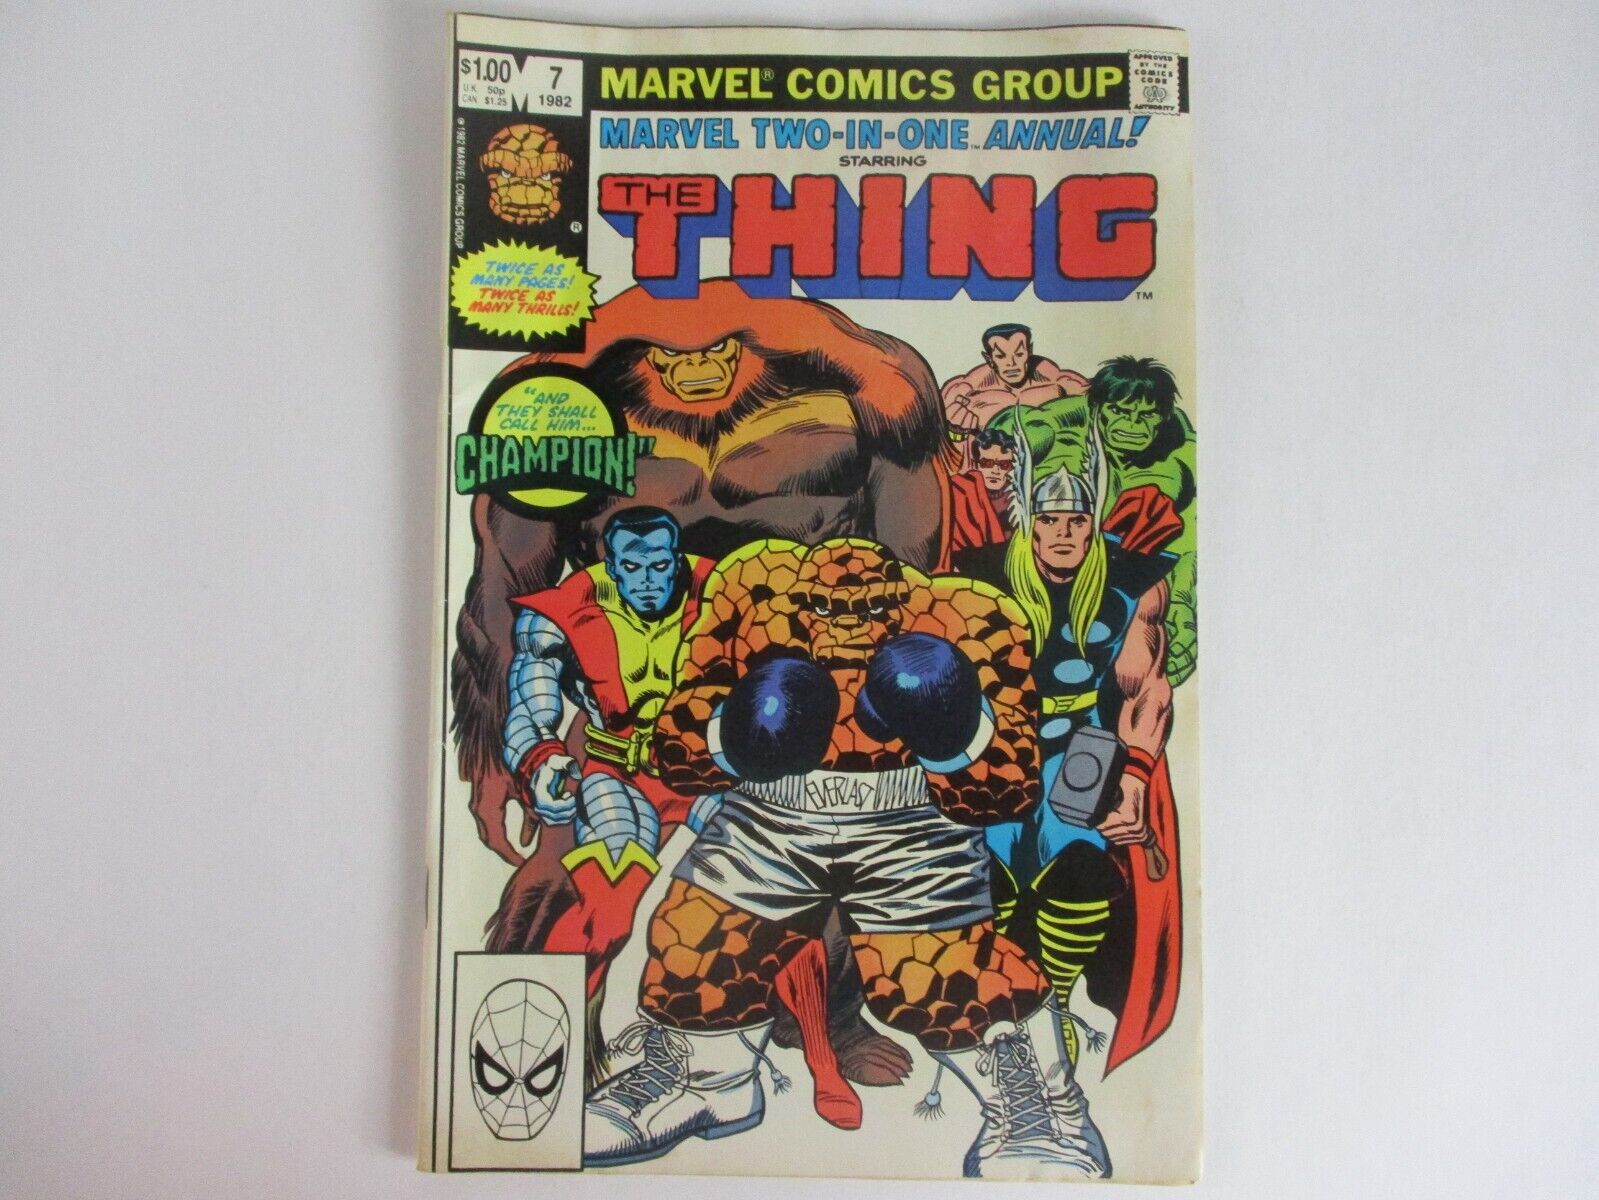 Marvel Comics THE THING Two-In-One Annual #7 1982 VG